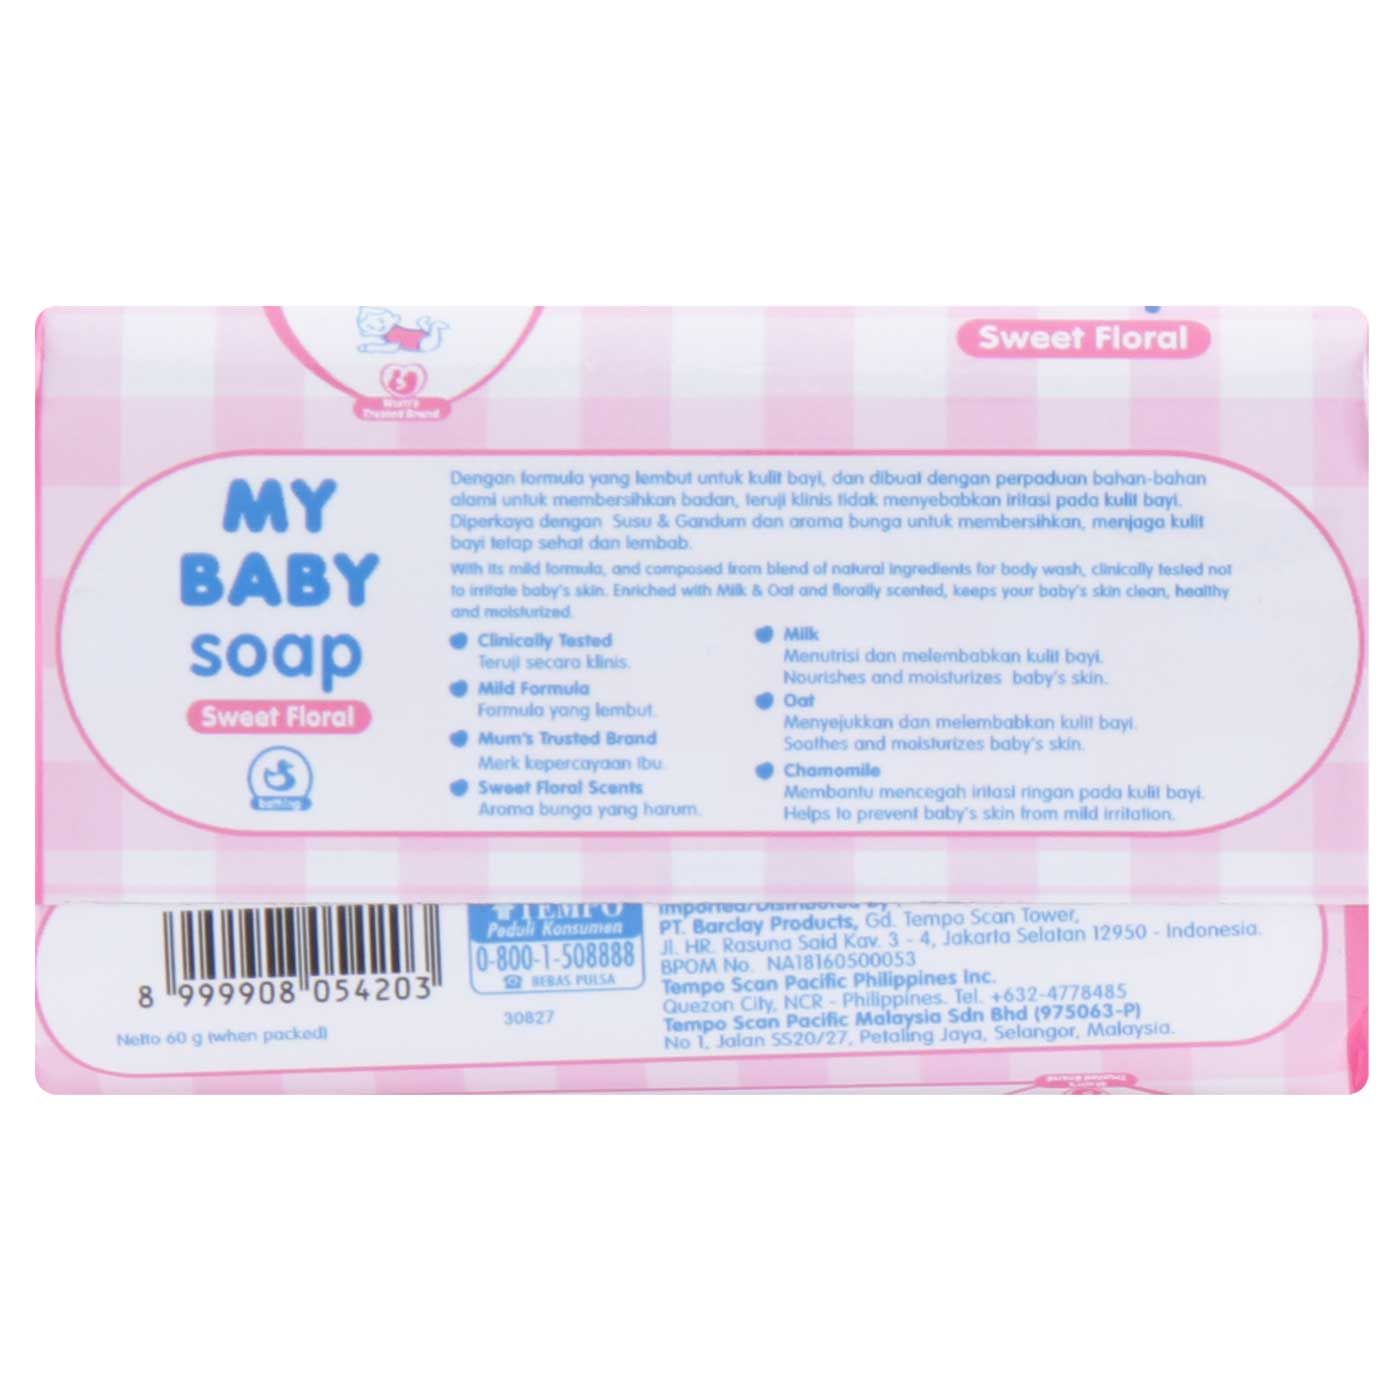 My Baby Soap Sweet Floral 60gr - 4